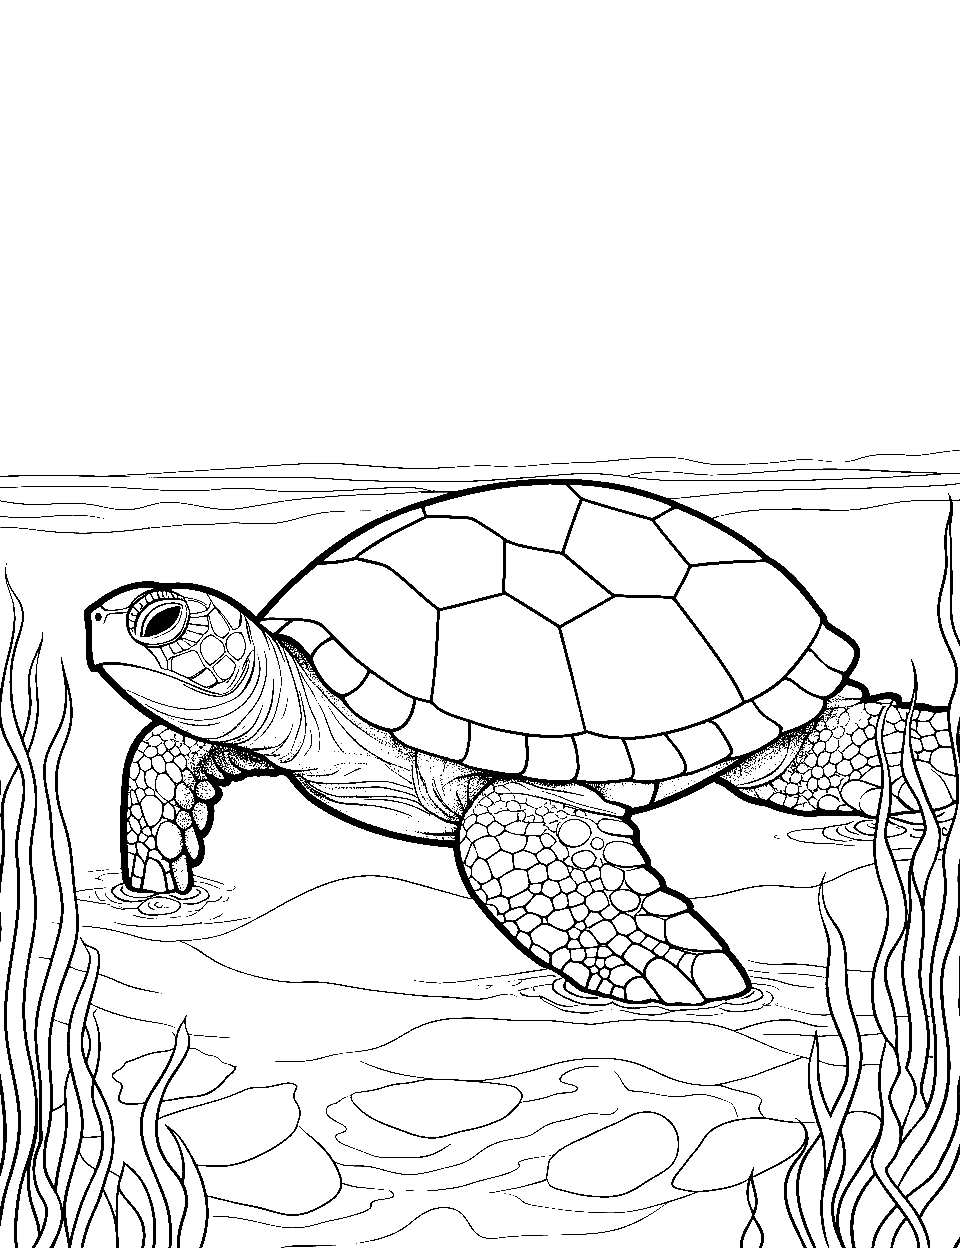 Pond Turtle Strolling Coloring Page - A pond turtle coming out of water.